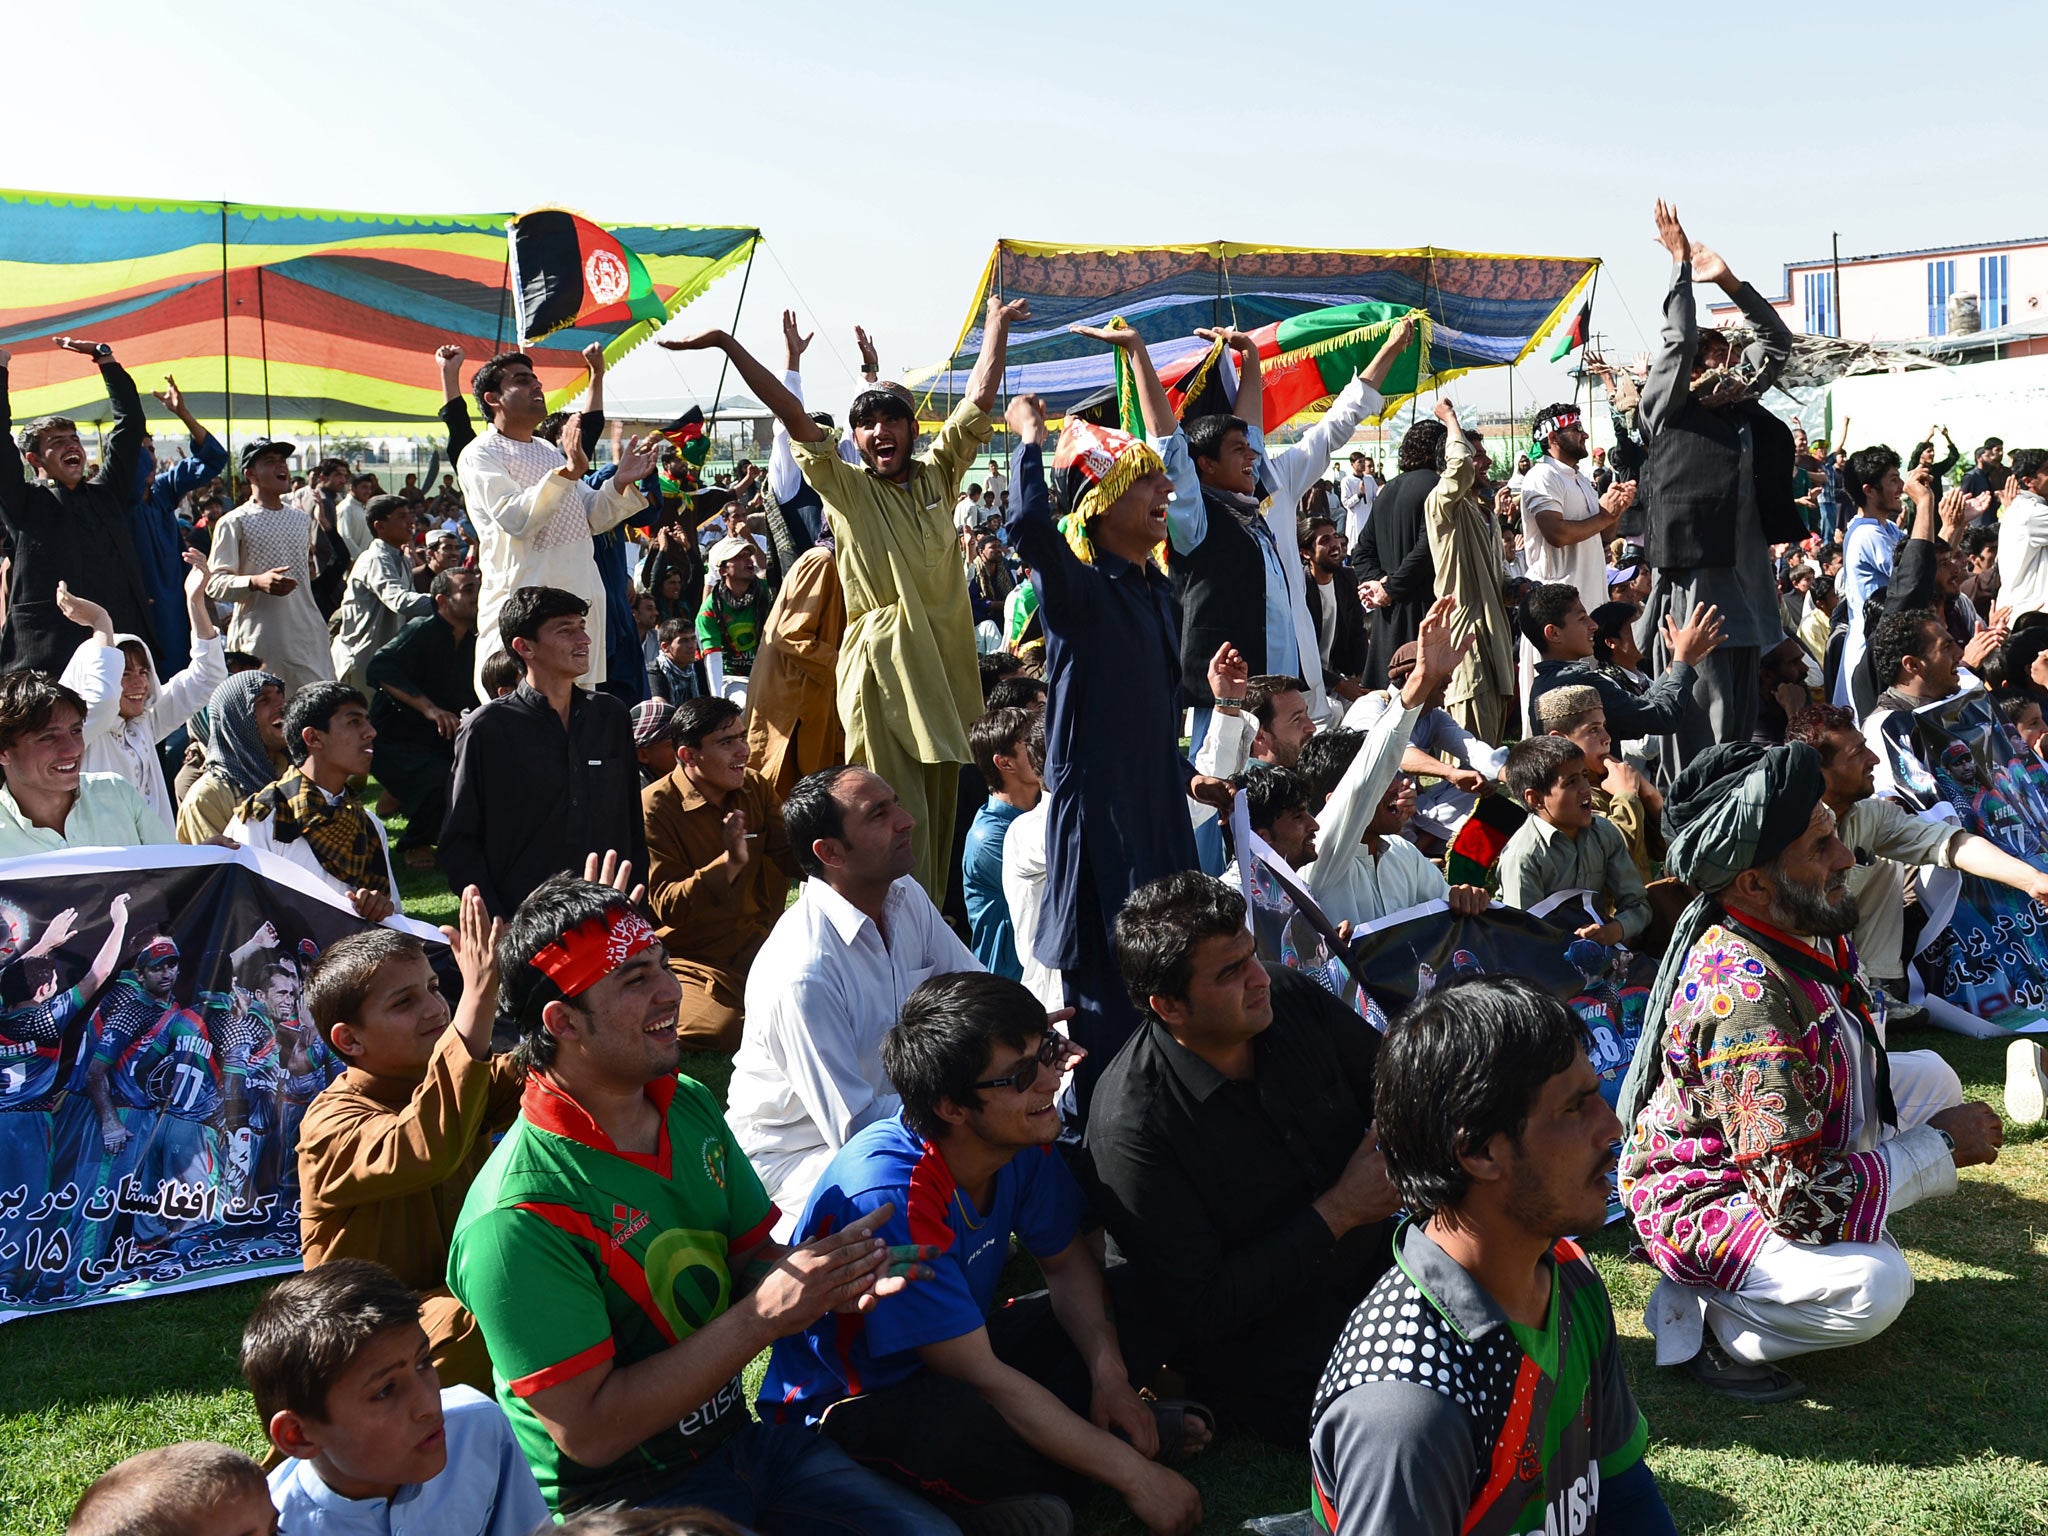 Afghan cricket fans celebrate runs by their team as they watch the Afghanistan and Kenya match on a screen at the International Cricket Stadium in Kabul